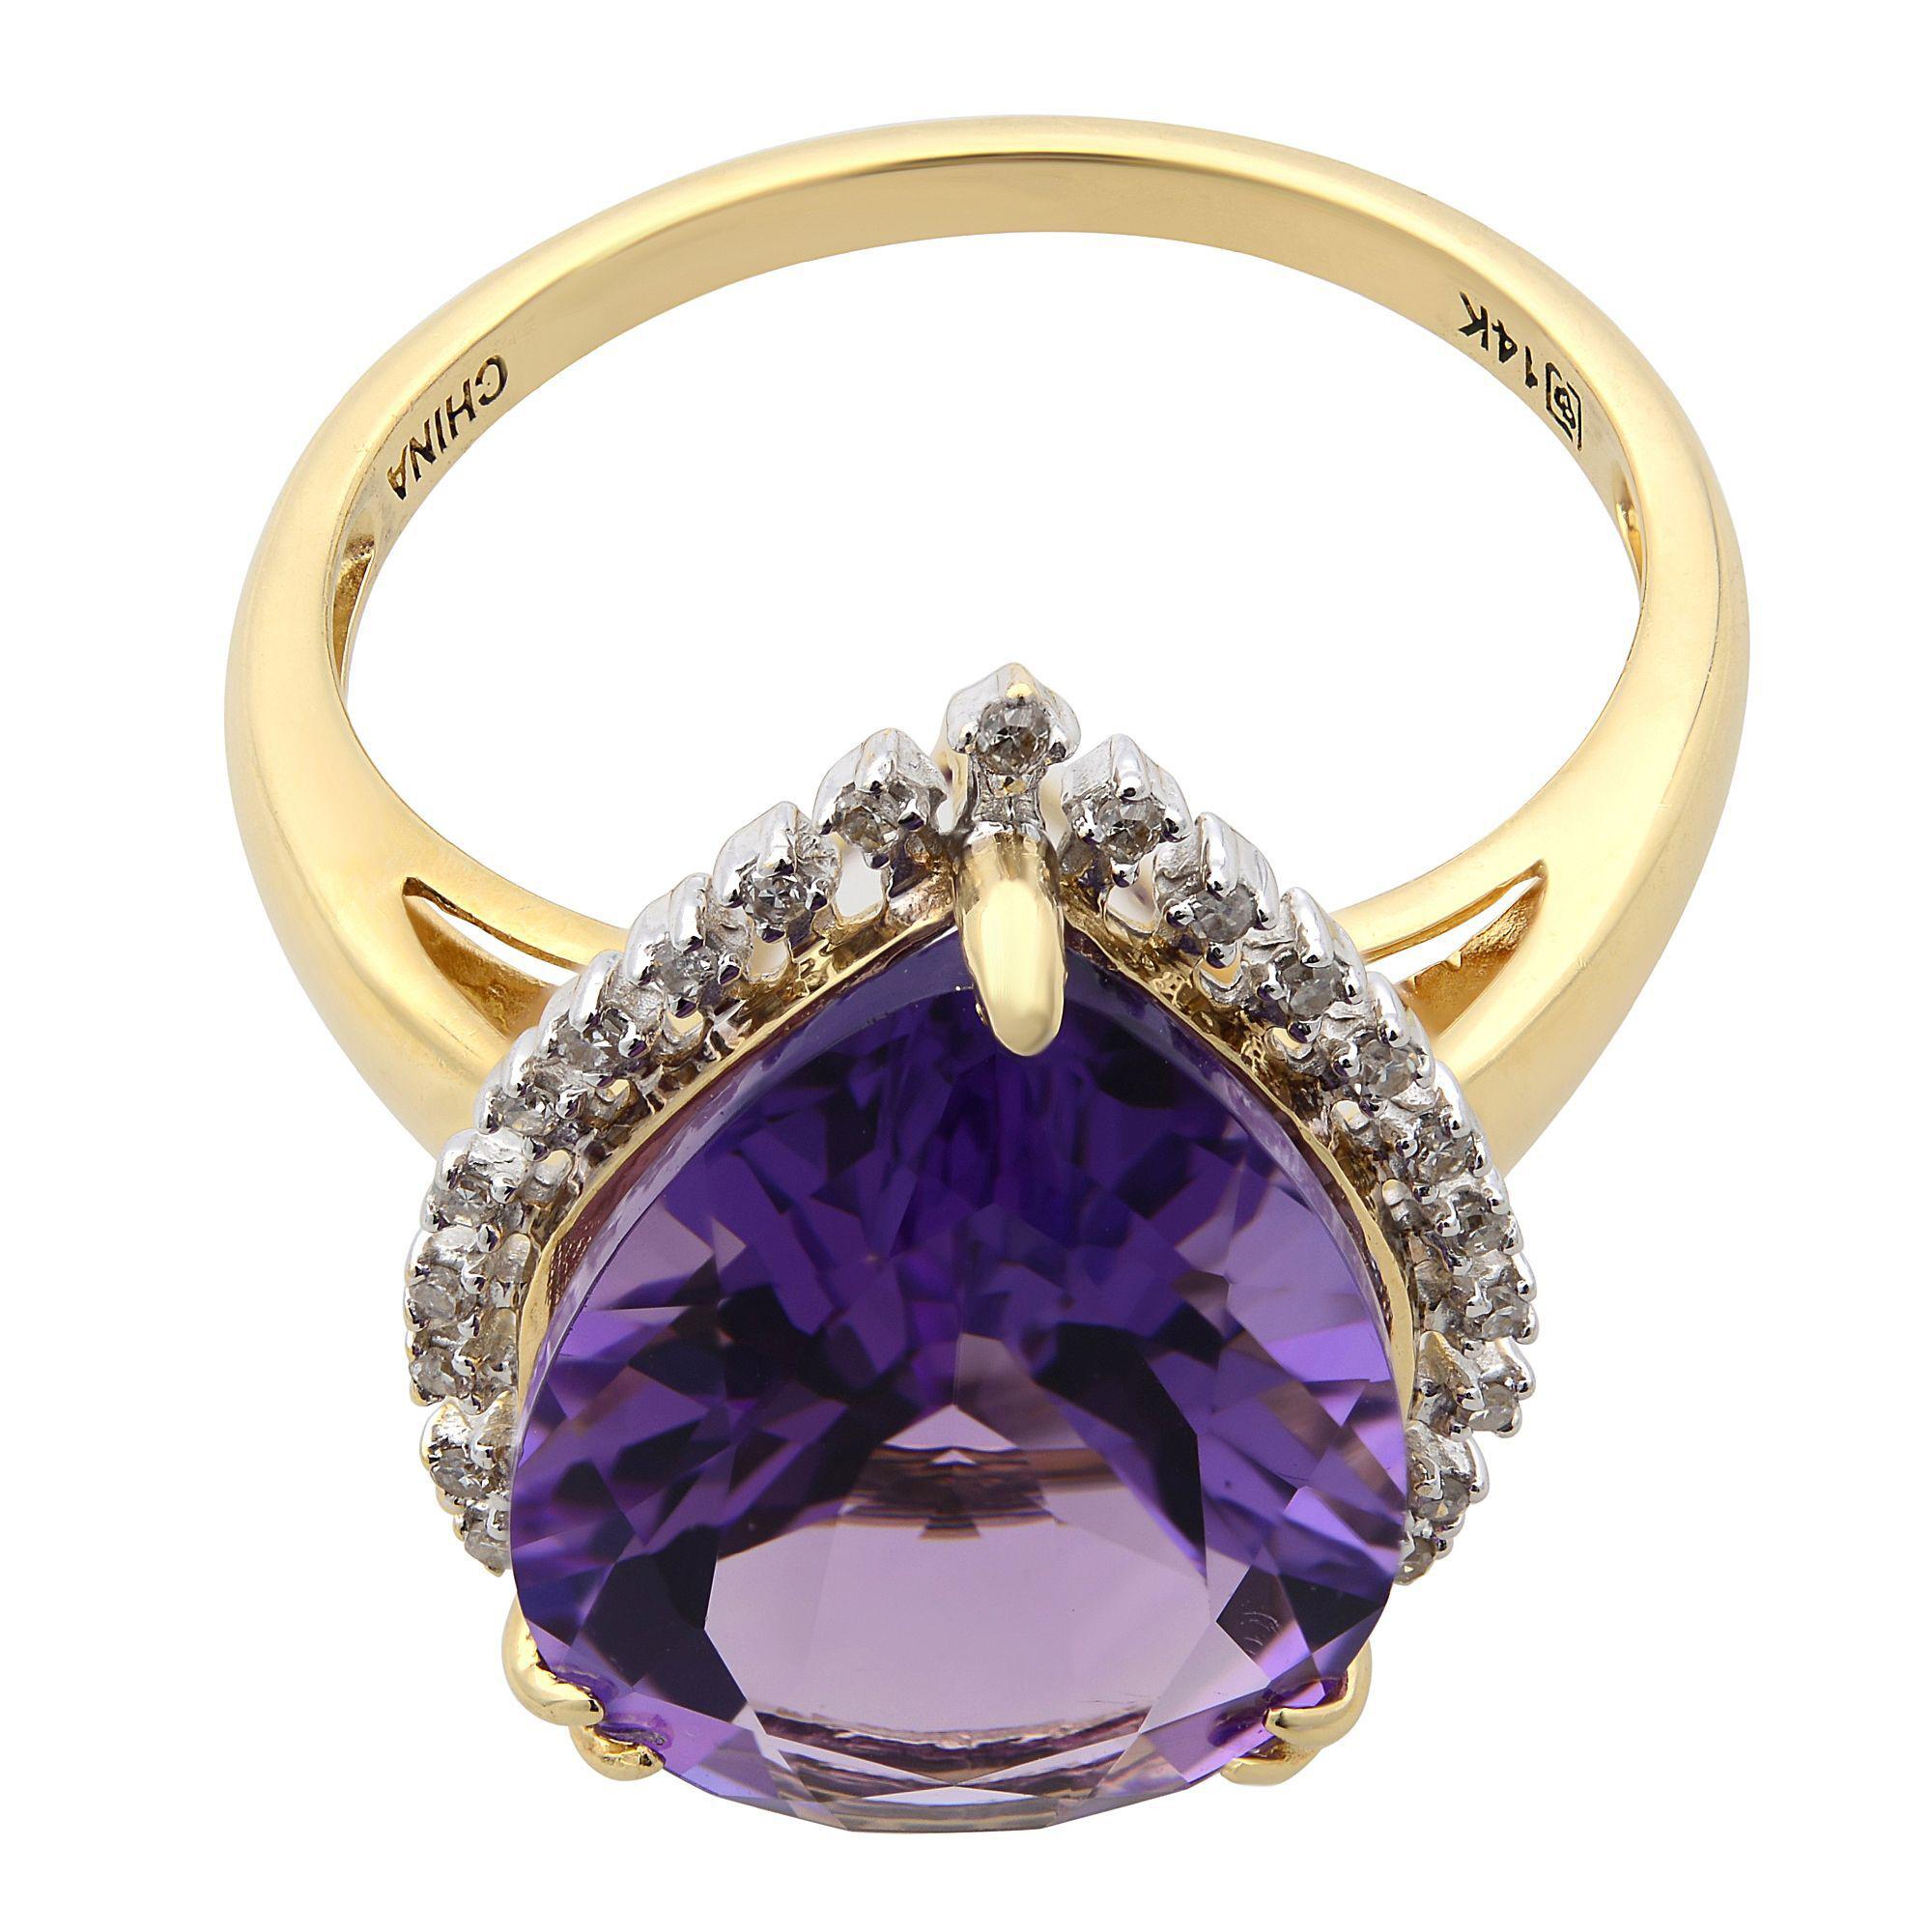 This amazing large Amethyst cocktail ring is crafted in 14k yellow gold. The prong set, intense purple amethyst is surrounded by a halo of glistening tiny diamonds. Amethyst size: 11.00 carat. Diamond total weight: 0.25 carat. Ring size US 11. Comes